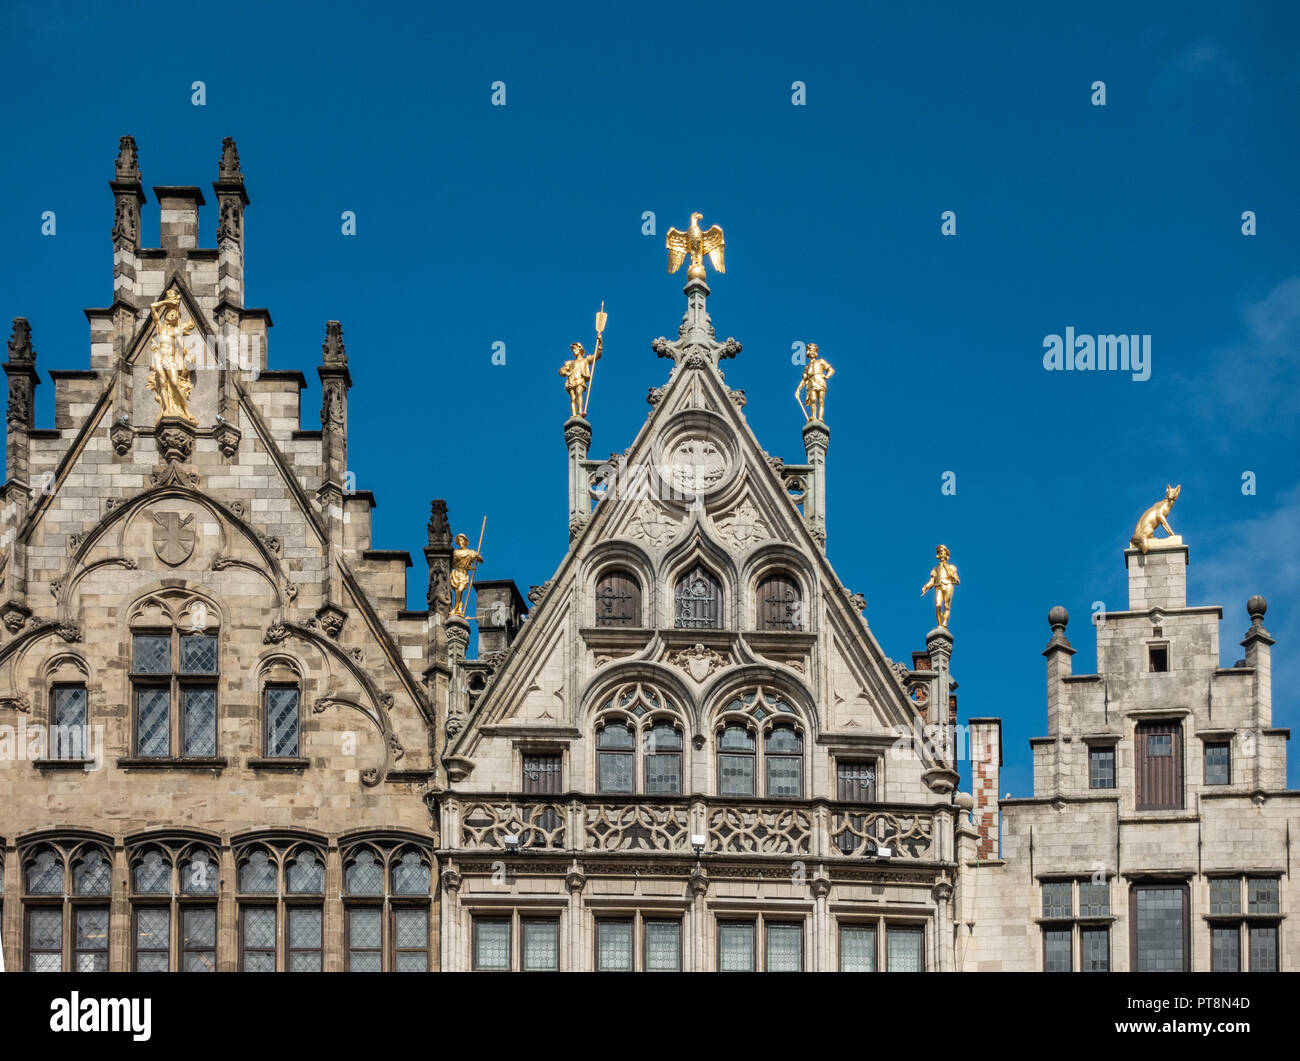 Antwerp, Belgium - September 24, 2018: Golden statues on top of the facades of guild houses on Grote Markt. Brown stones, arches under blue sky. Stock Photo